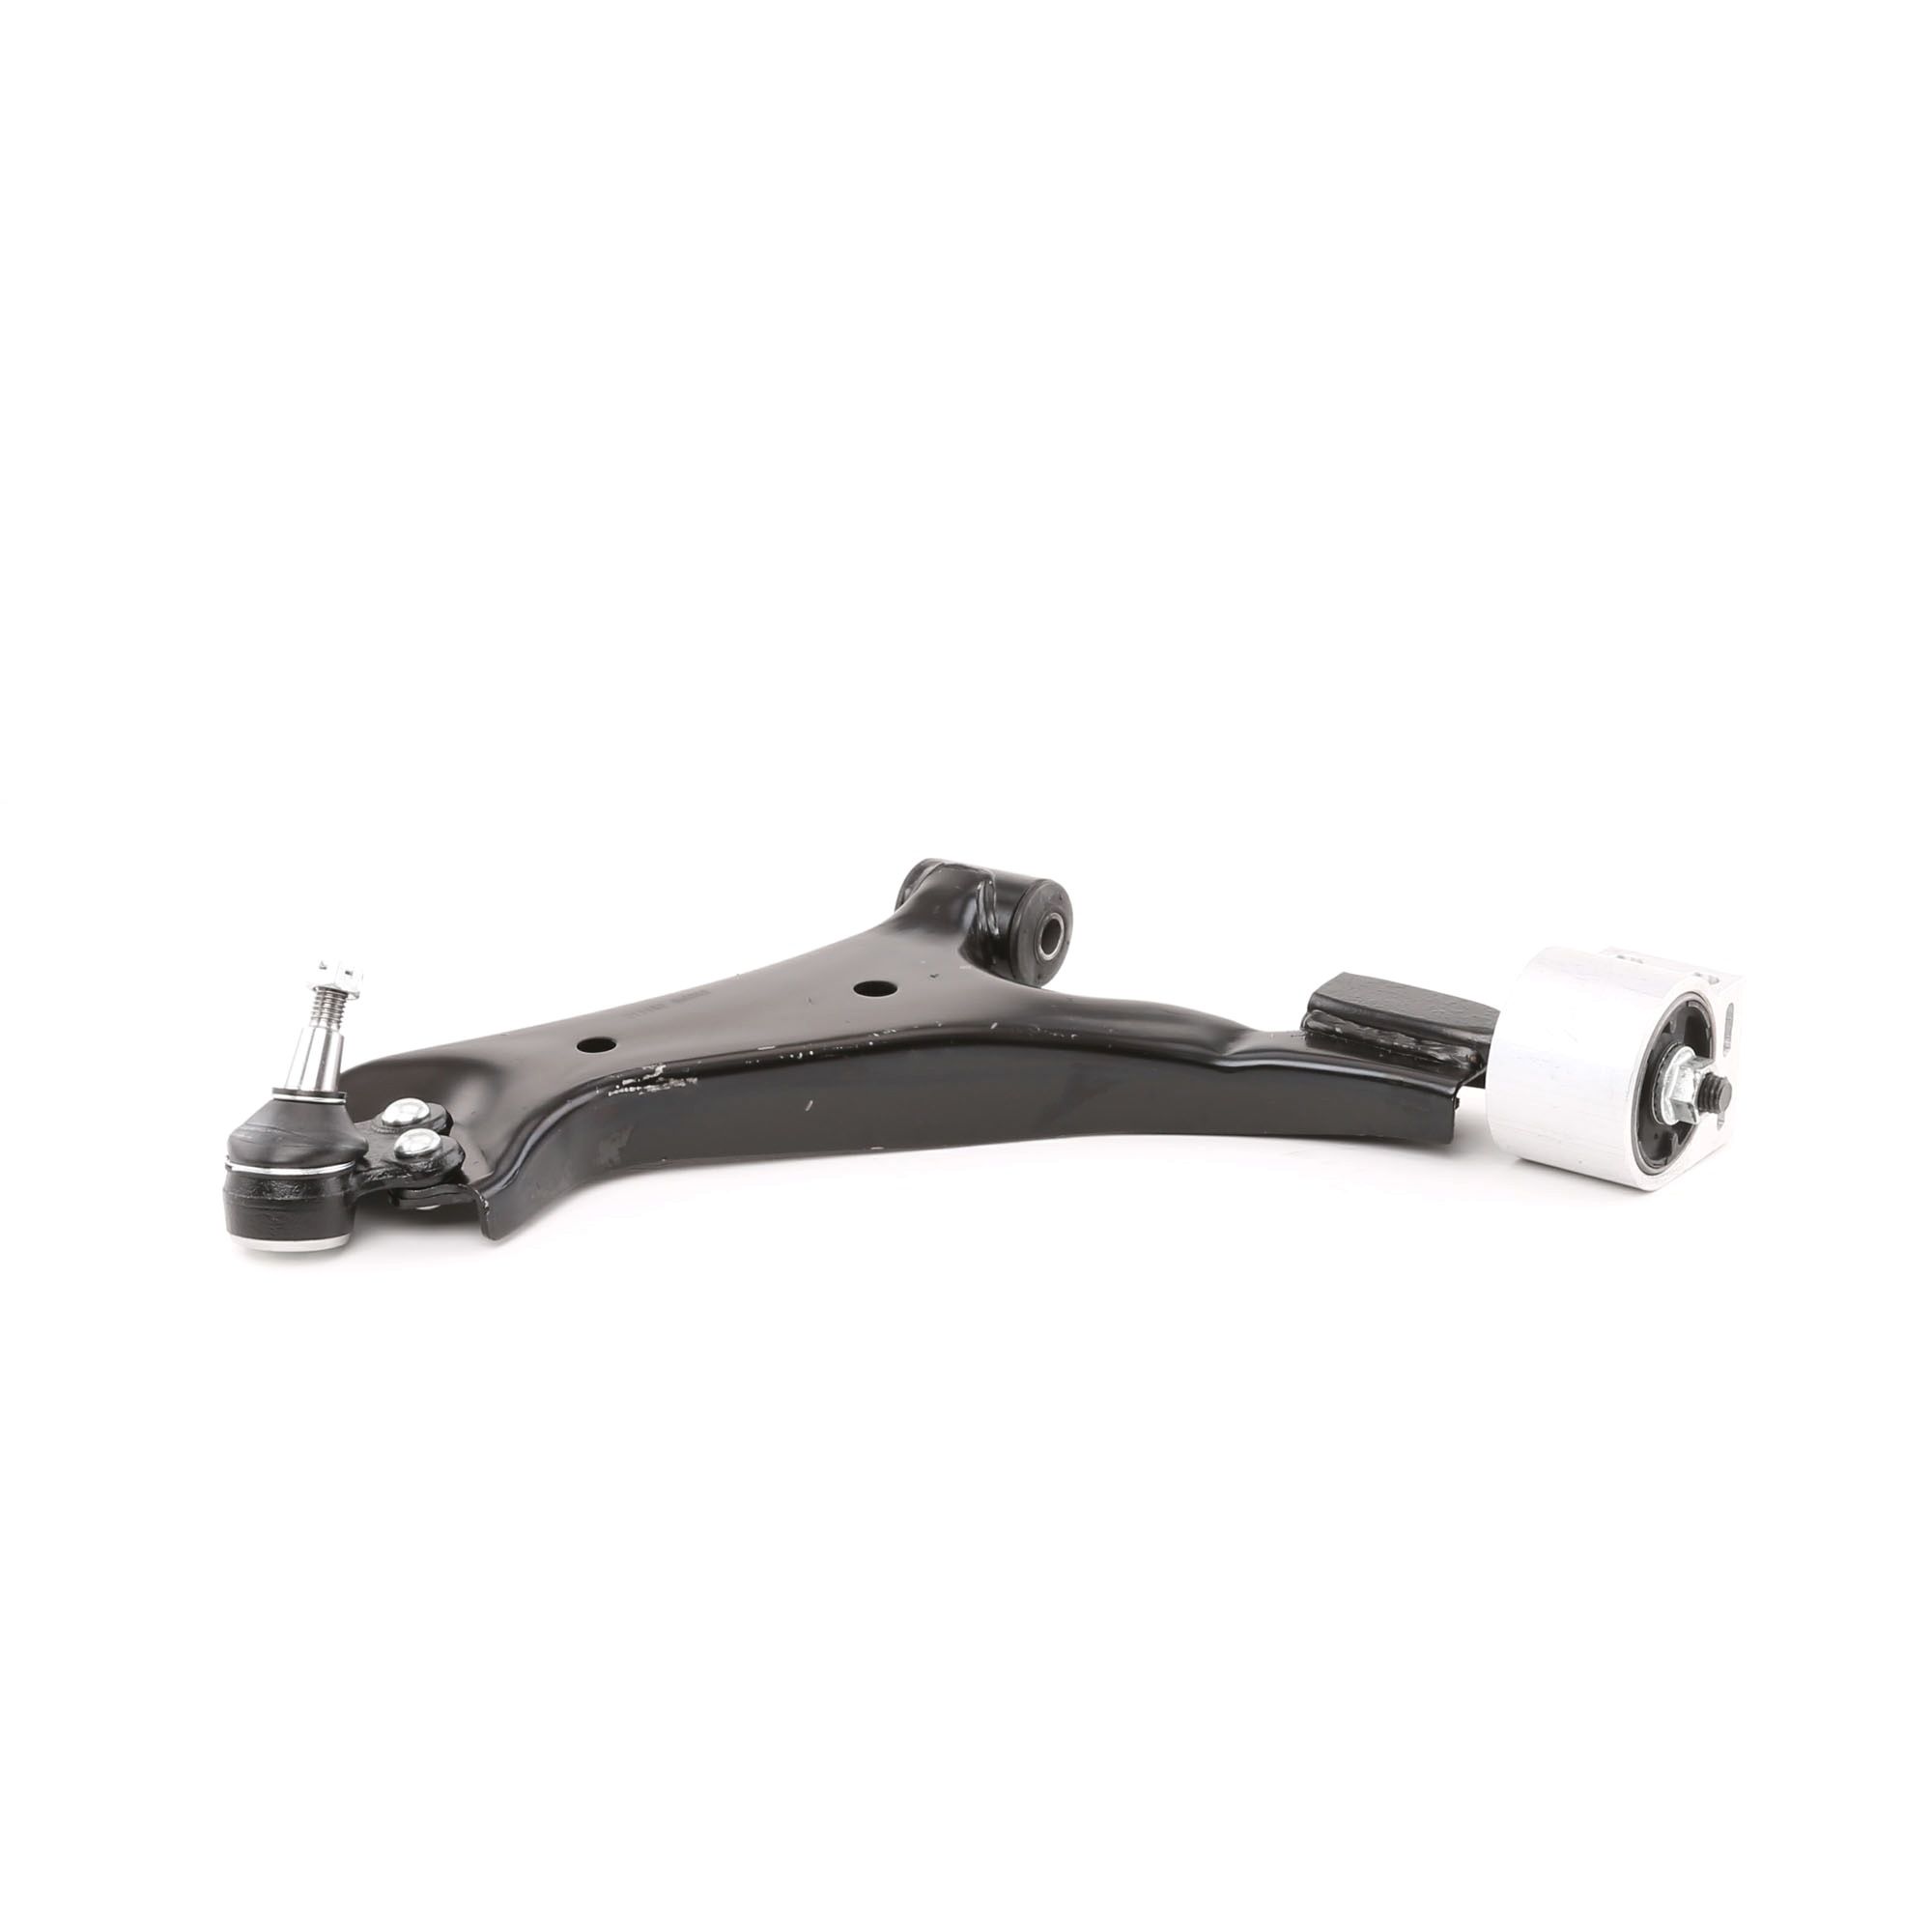 A.B.S. Control arms rear and front Captiva C100 new 211152